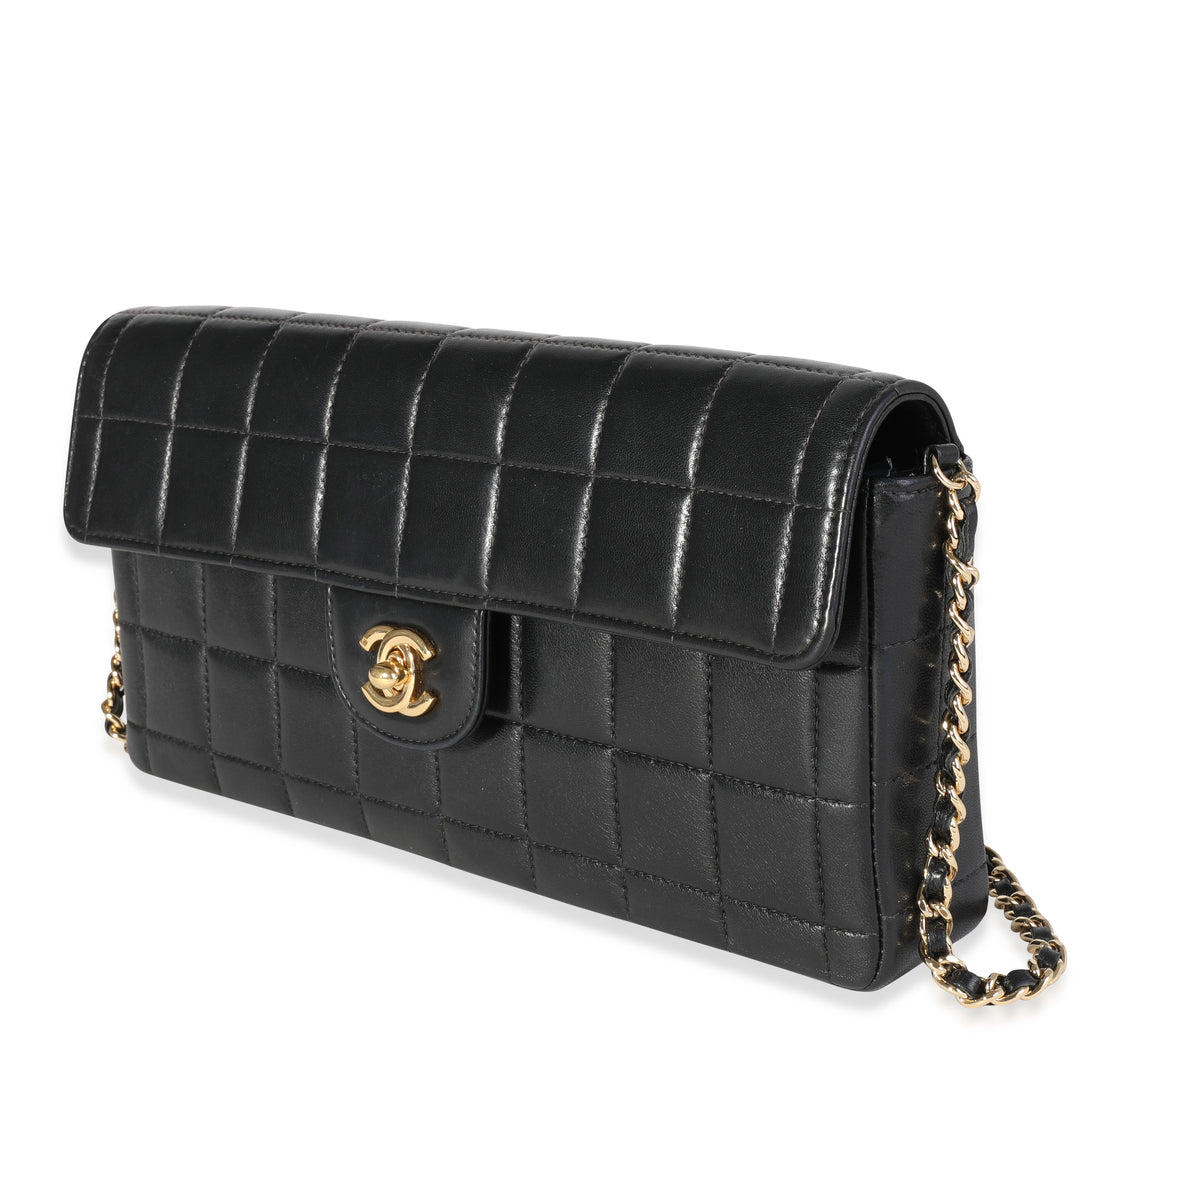 East west chocolate bar leather handbag Chanel Black in Leather